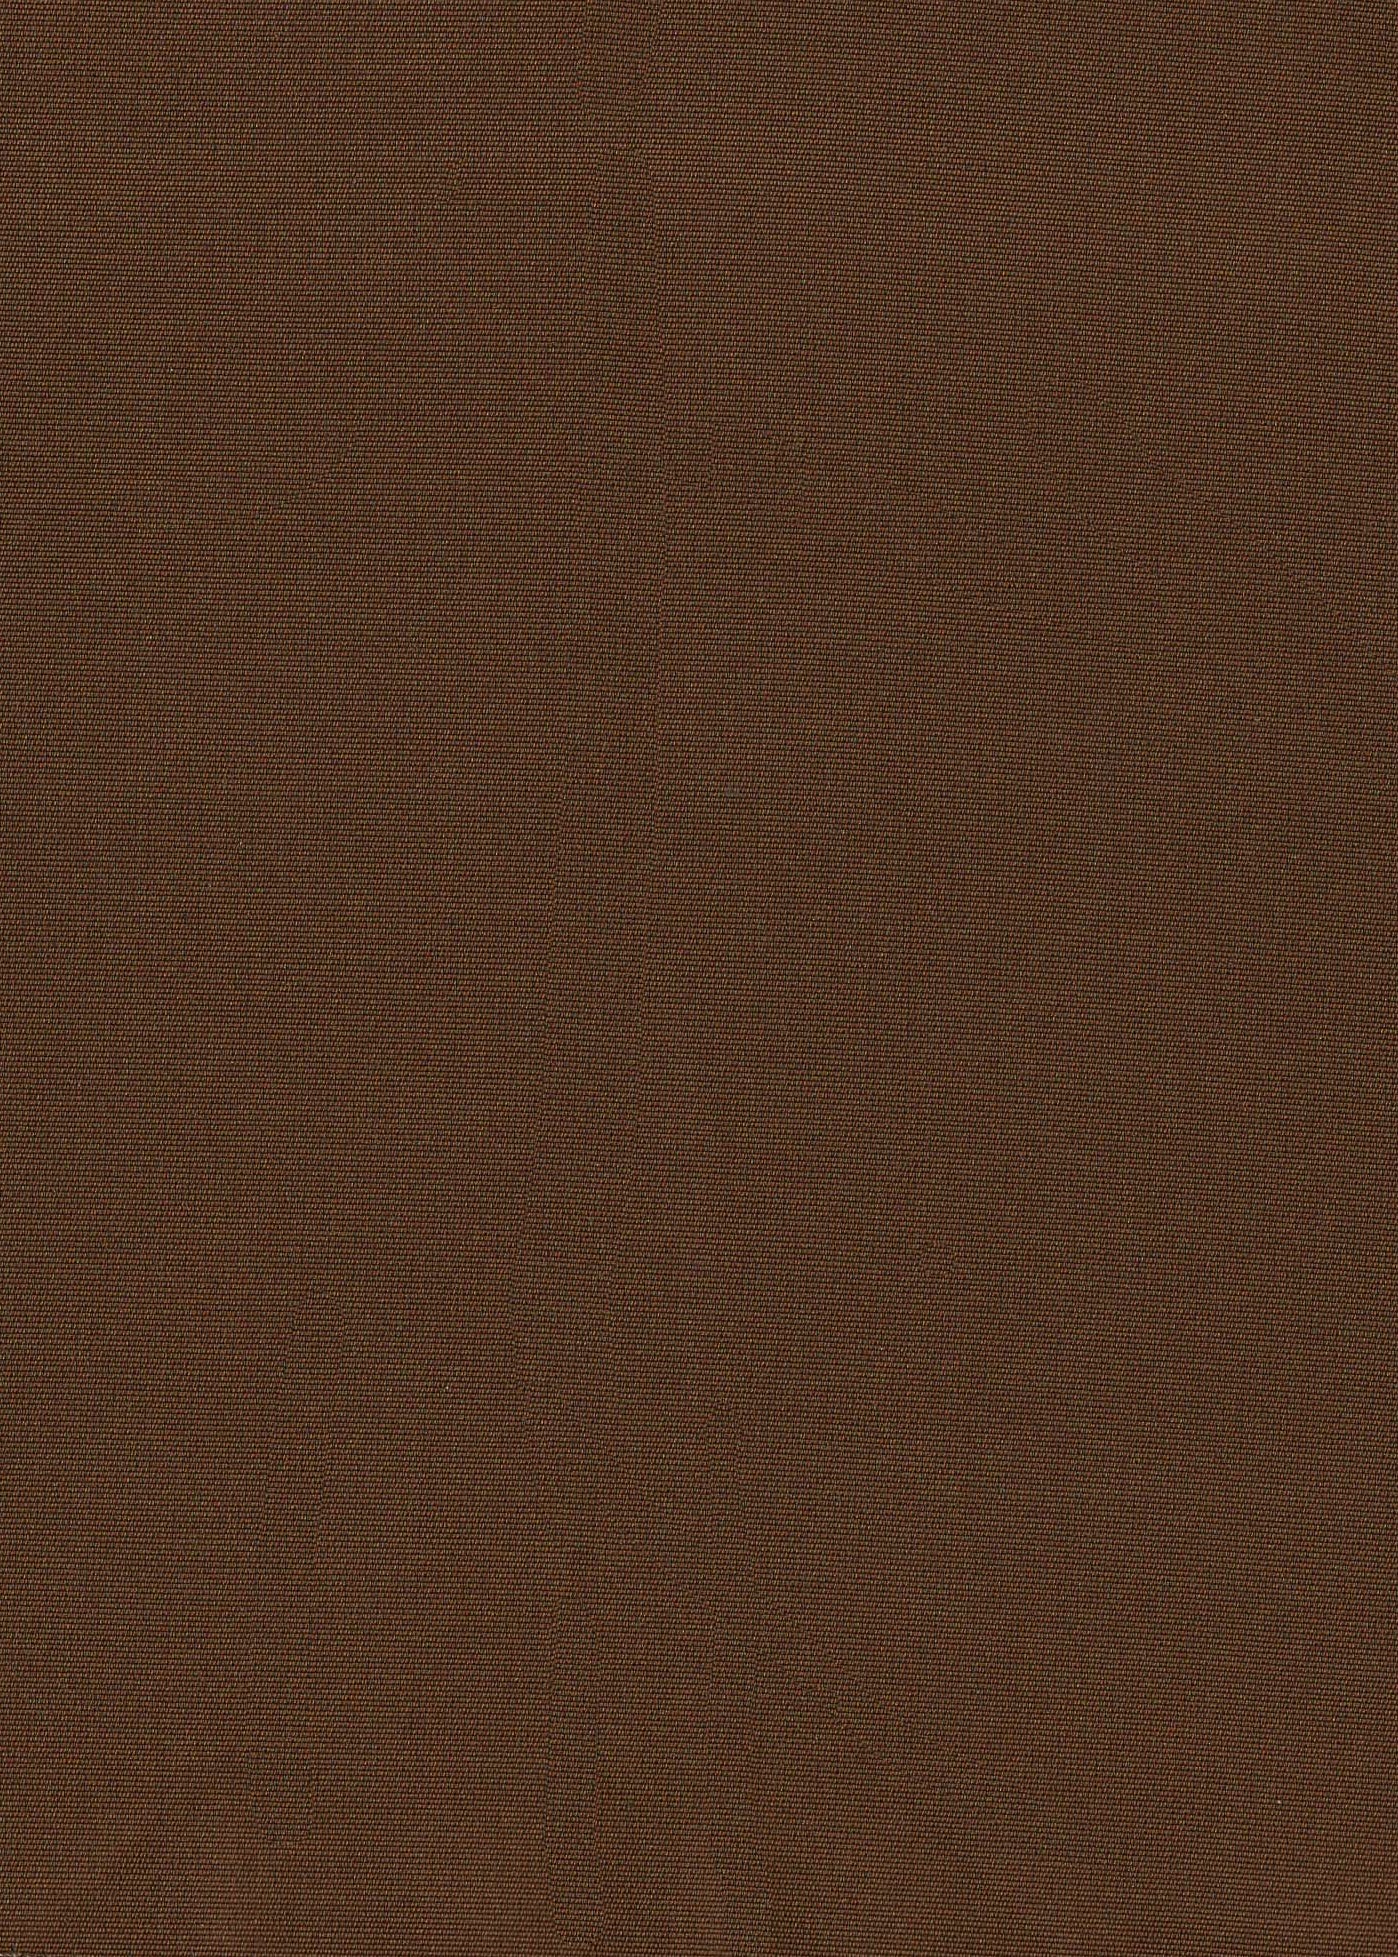 chocolate brown silk and cotton fabric